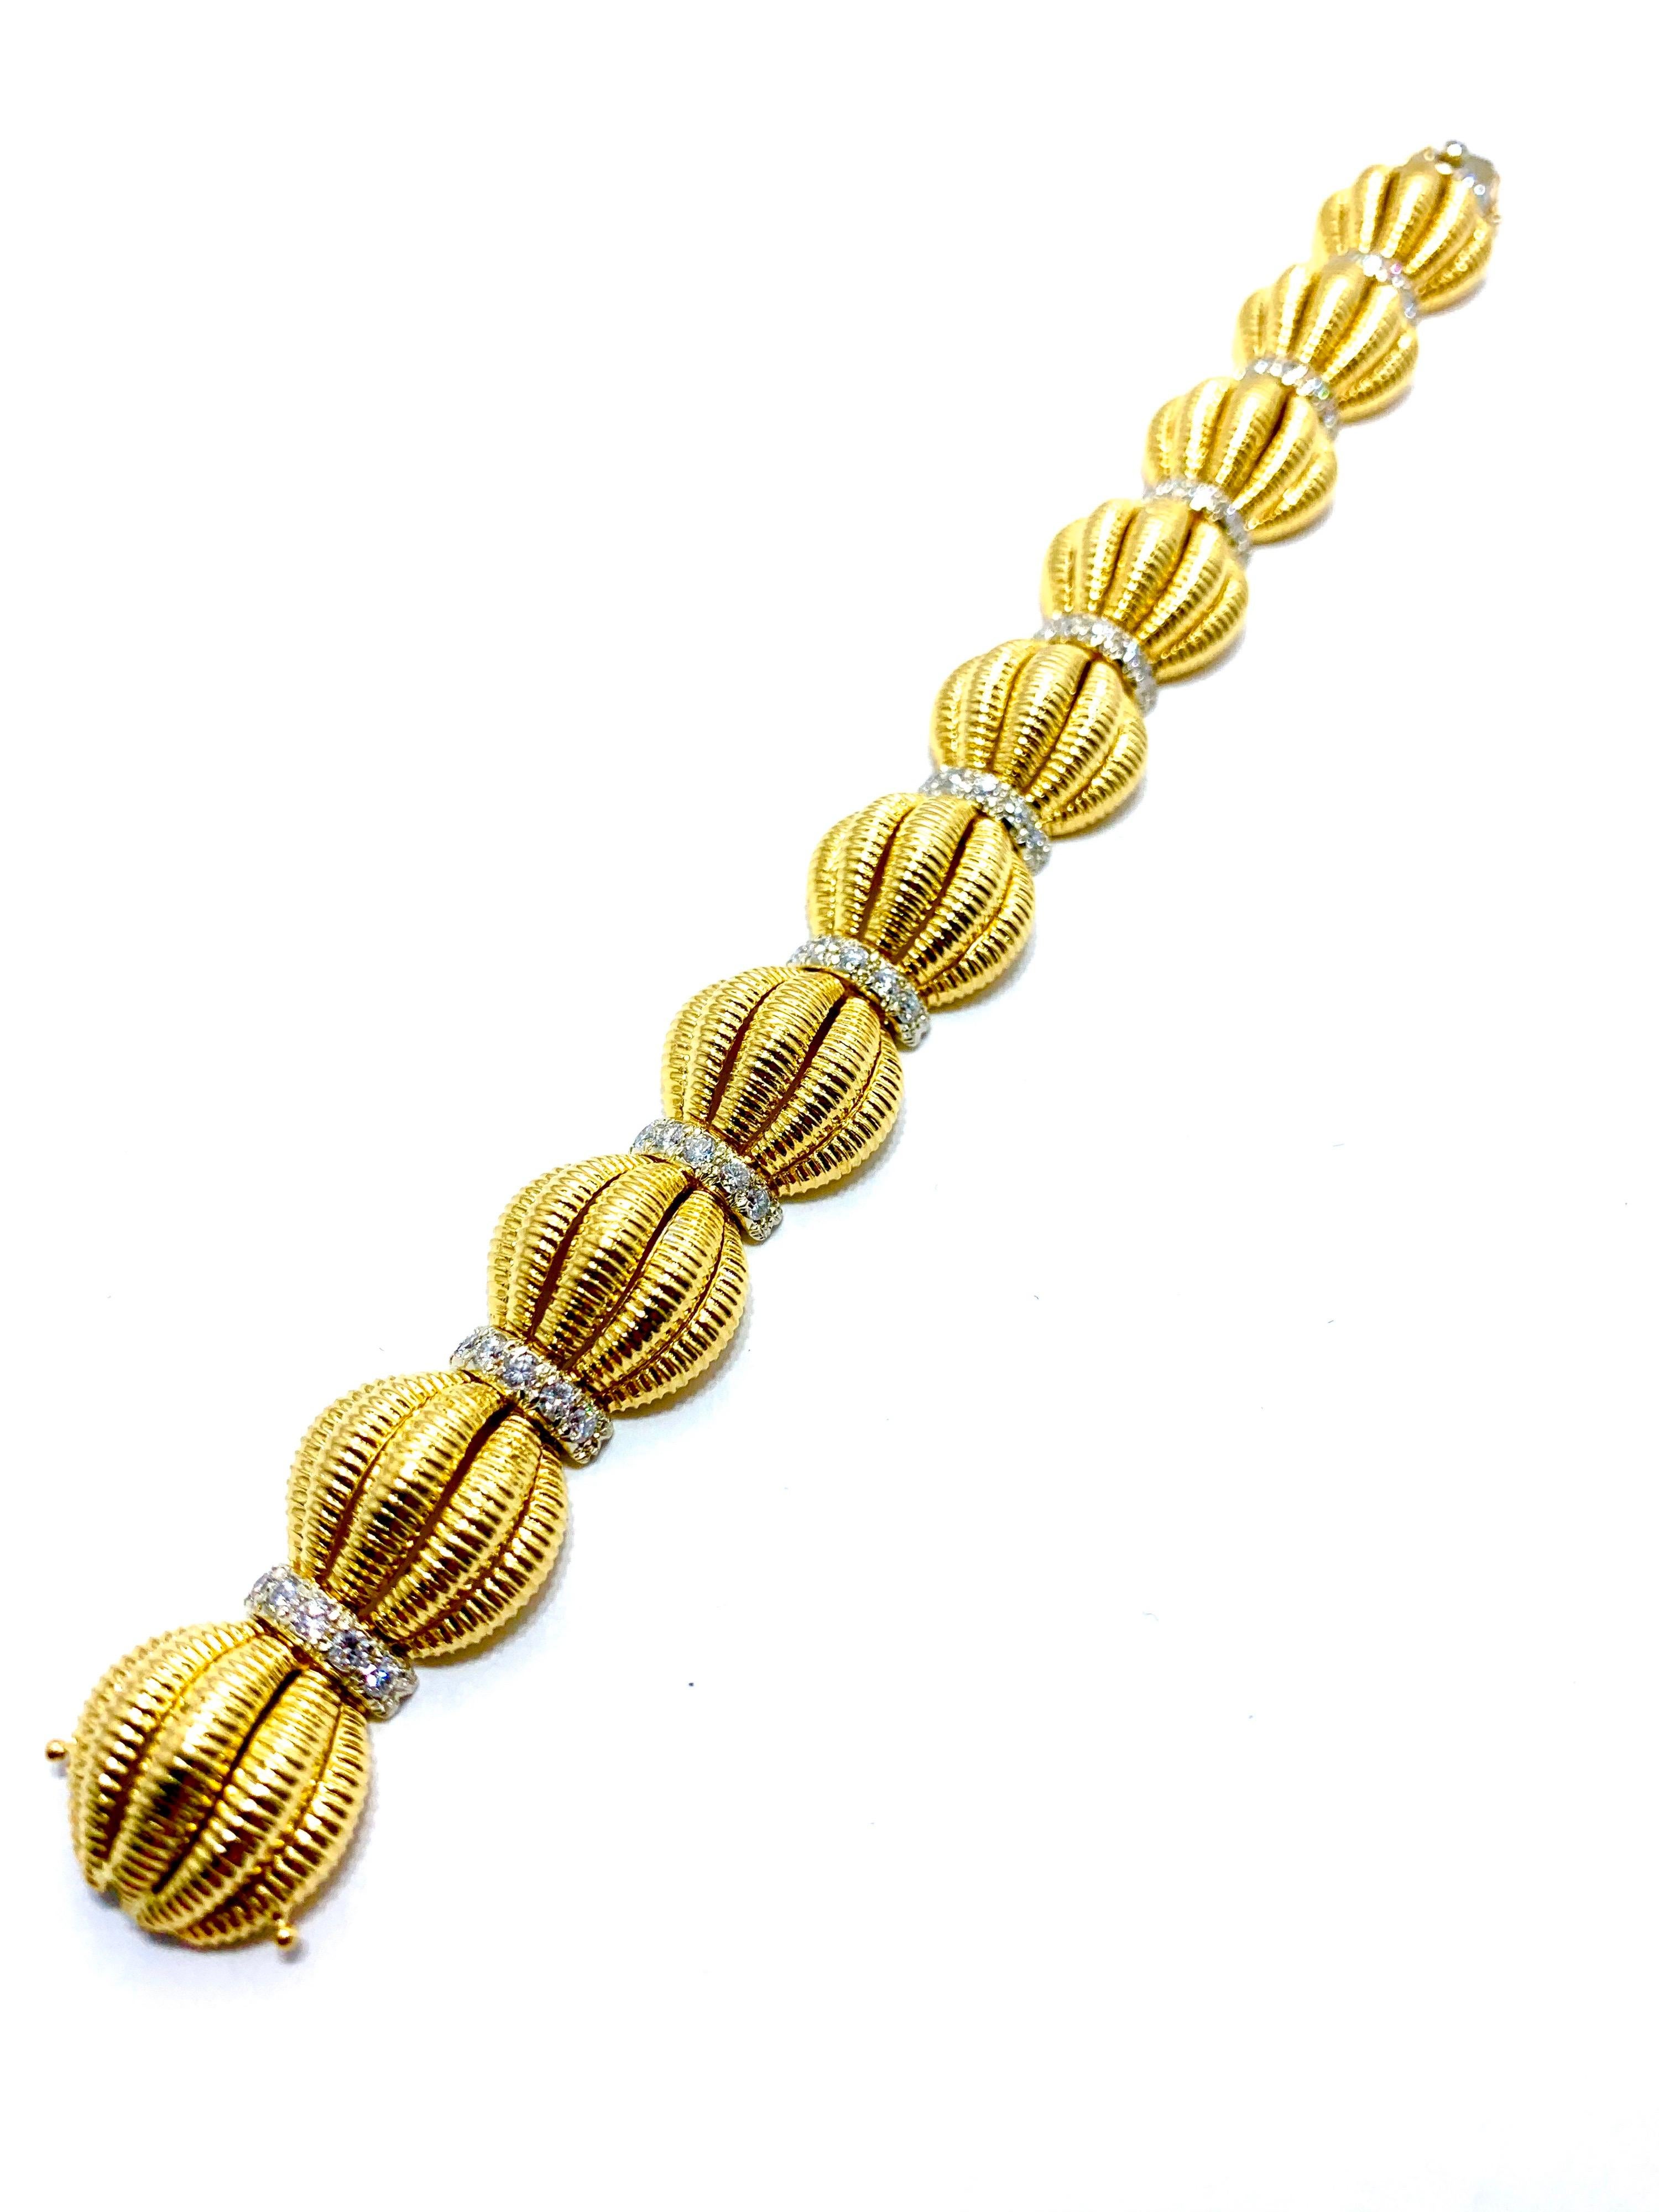 This is a rare beauty! A Tiffany & Co. 2.50 carat round brilliant Diamond and 18 karat yellow gold domed textured link bracelet. The bracelet is designed with a single row of five diamonds each at each link junction. the diamonds are E-F color, VS